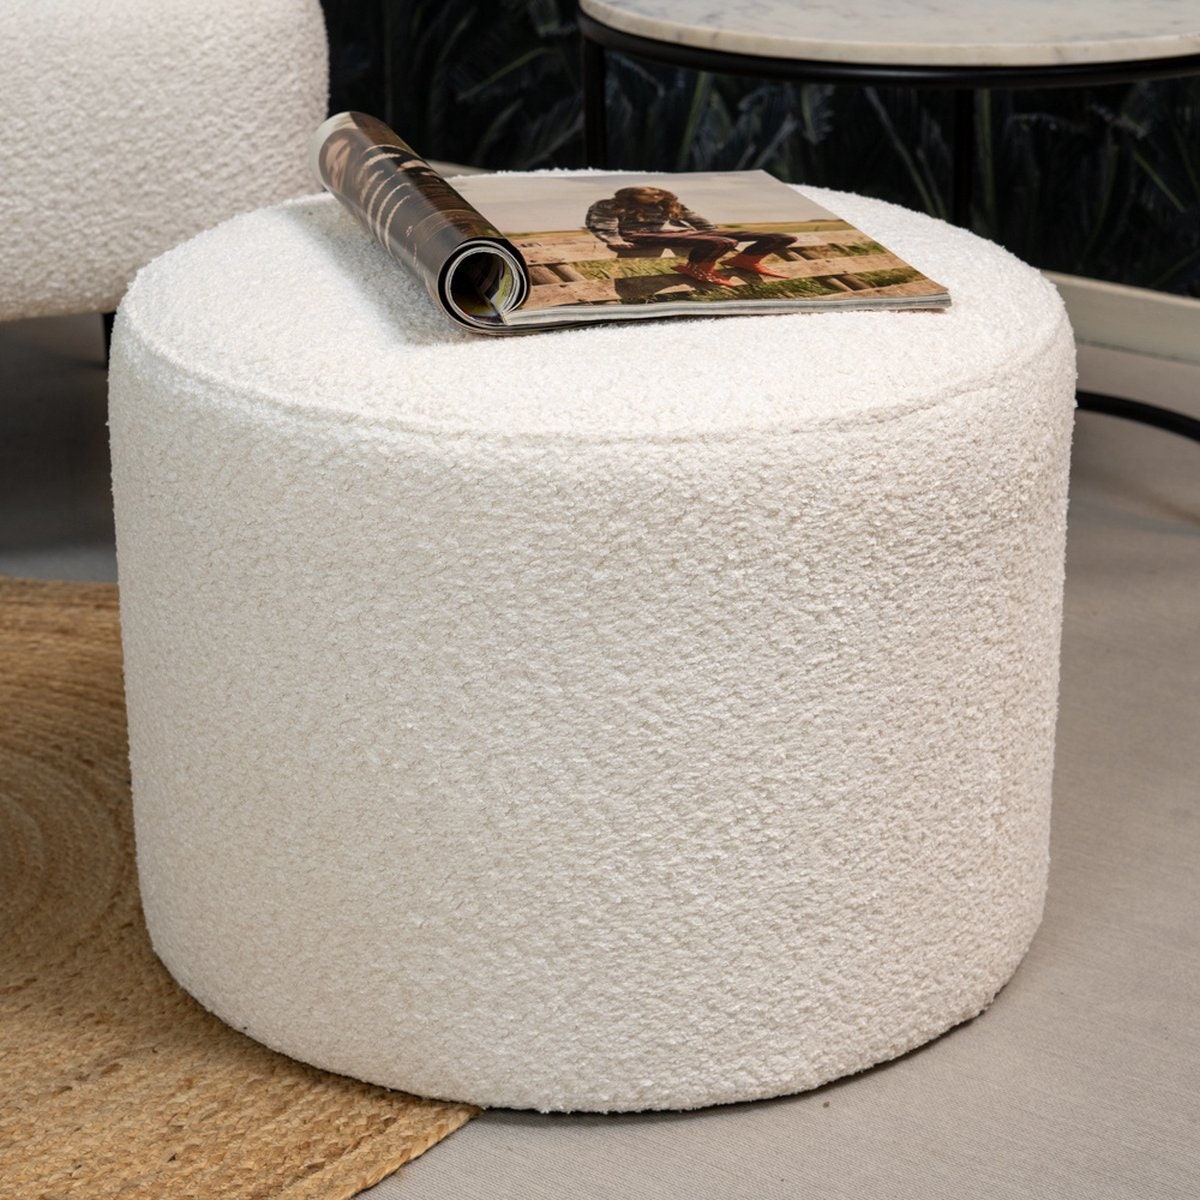 Soft Royal Indoor/Outdoor Pouf - Zipper Cover with Luxury Polyfil Stuffing